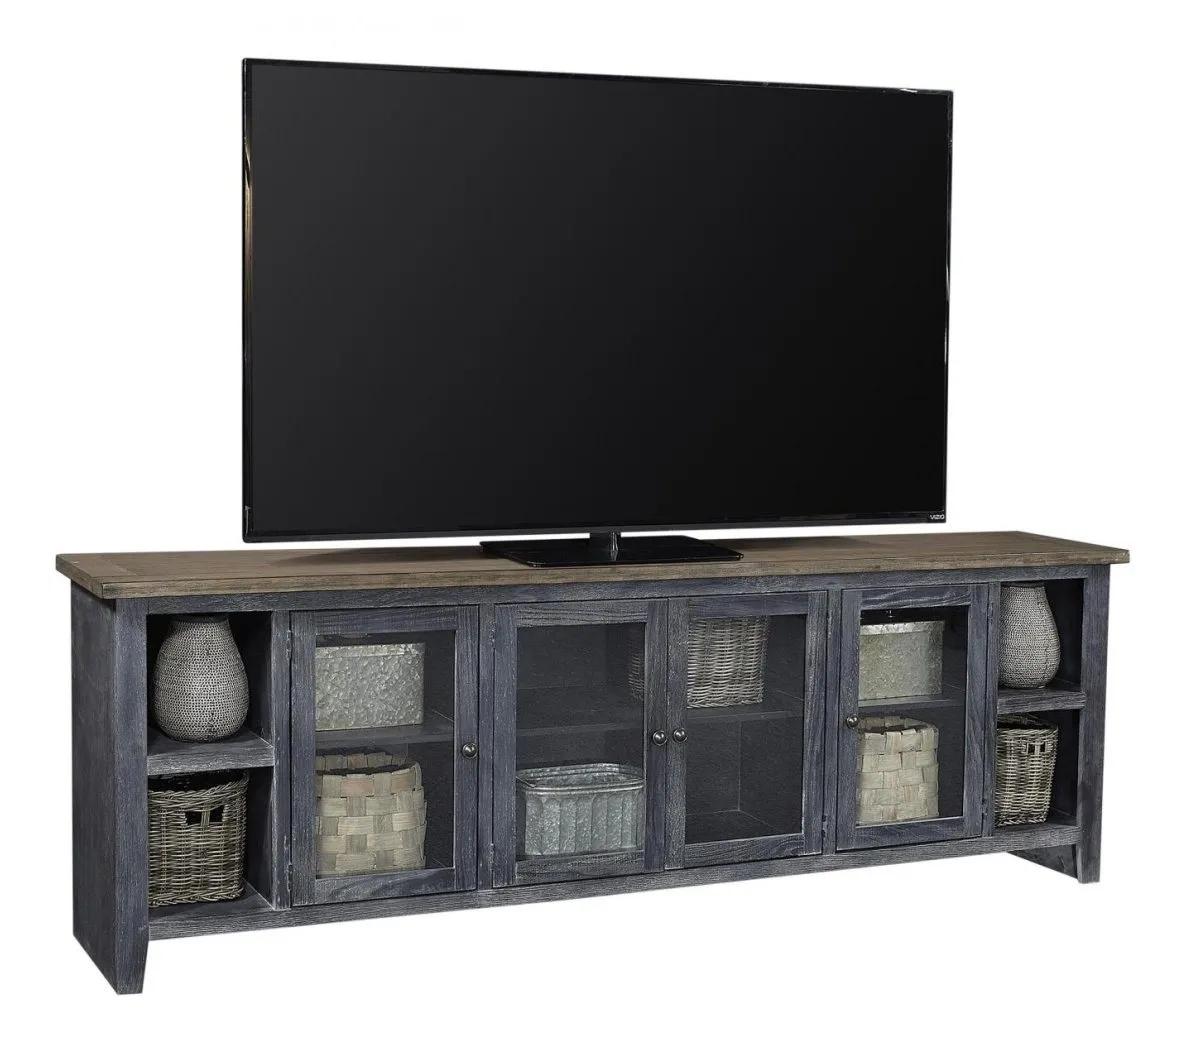 EASTPORT DRIFTED BLACK 97 INCH TV STAND CONSOLE WITH 4 DOORS